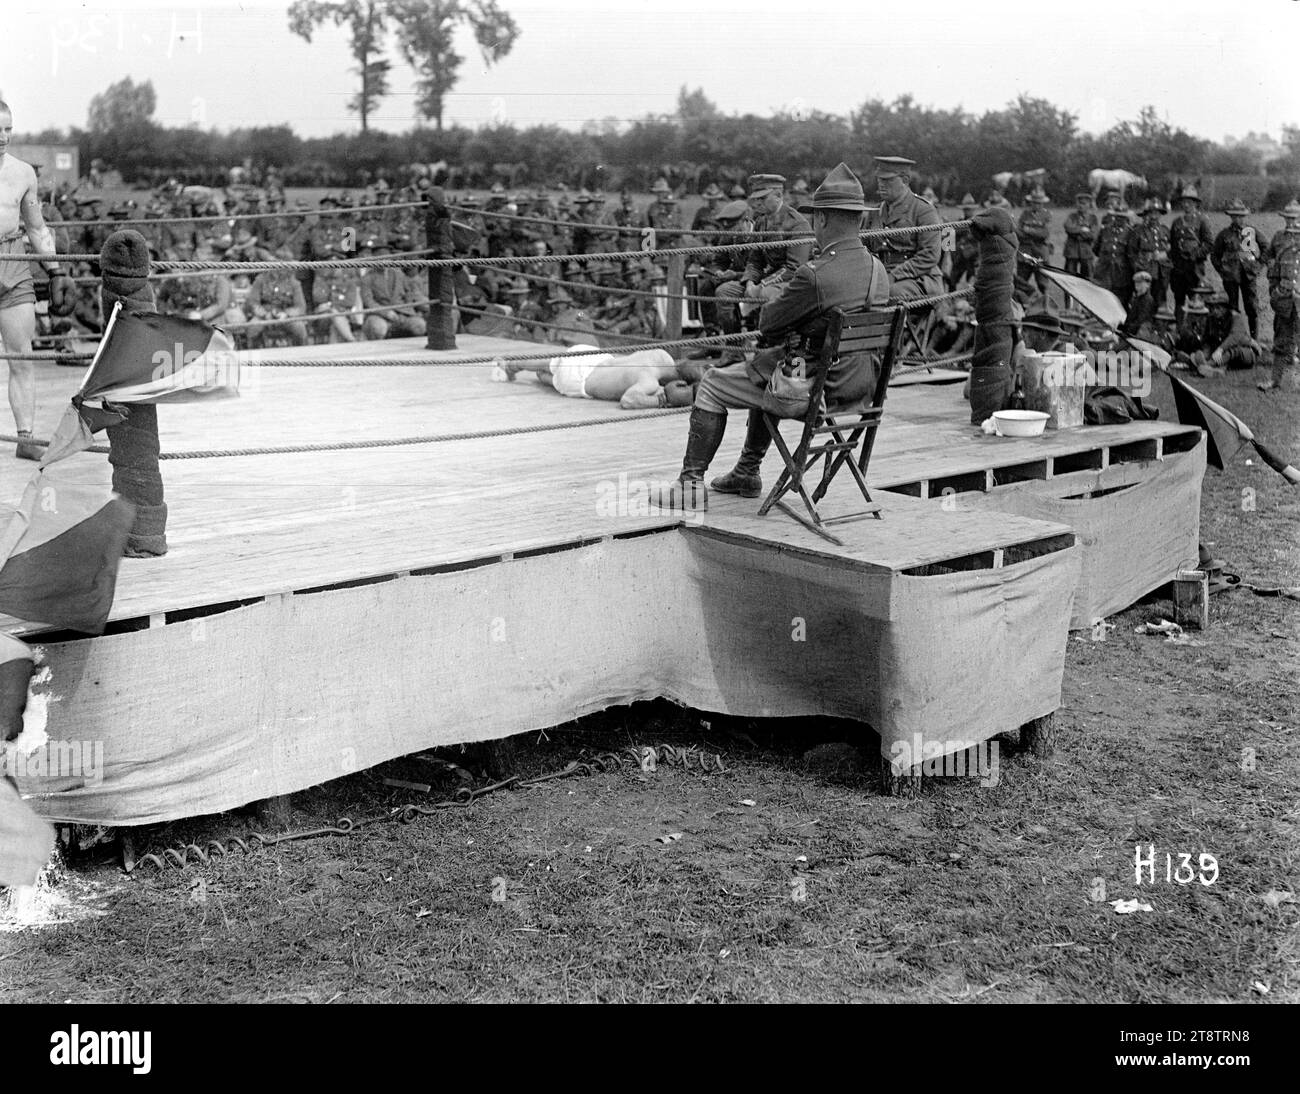 A knock-out at the New Zealand Division boxing championships, France, A soldier lies on the canvas during a boxing match at the Divisional championships at Doulieu in France during World War I. Photograph taken 6 or 10 July 1917 Stock Photo